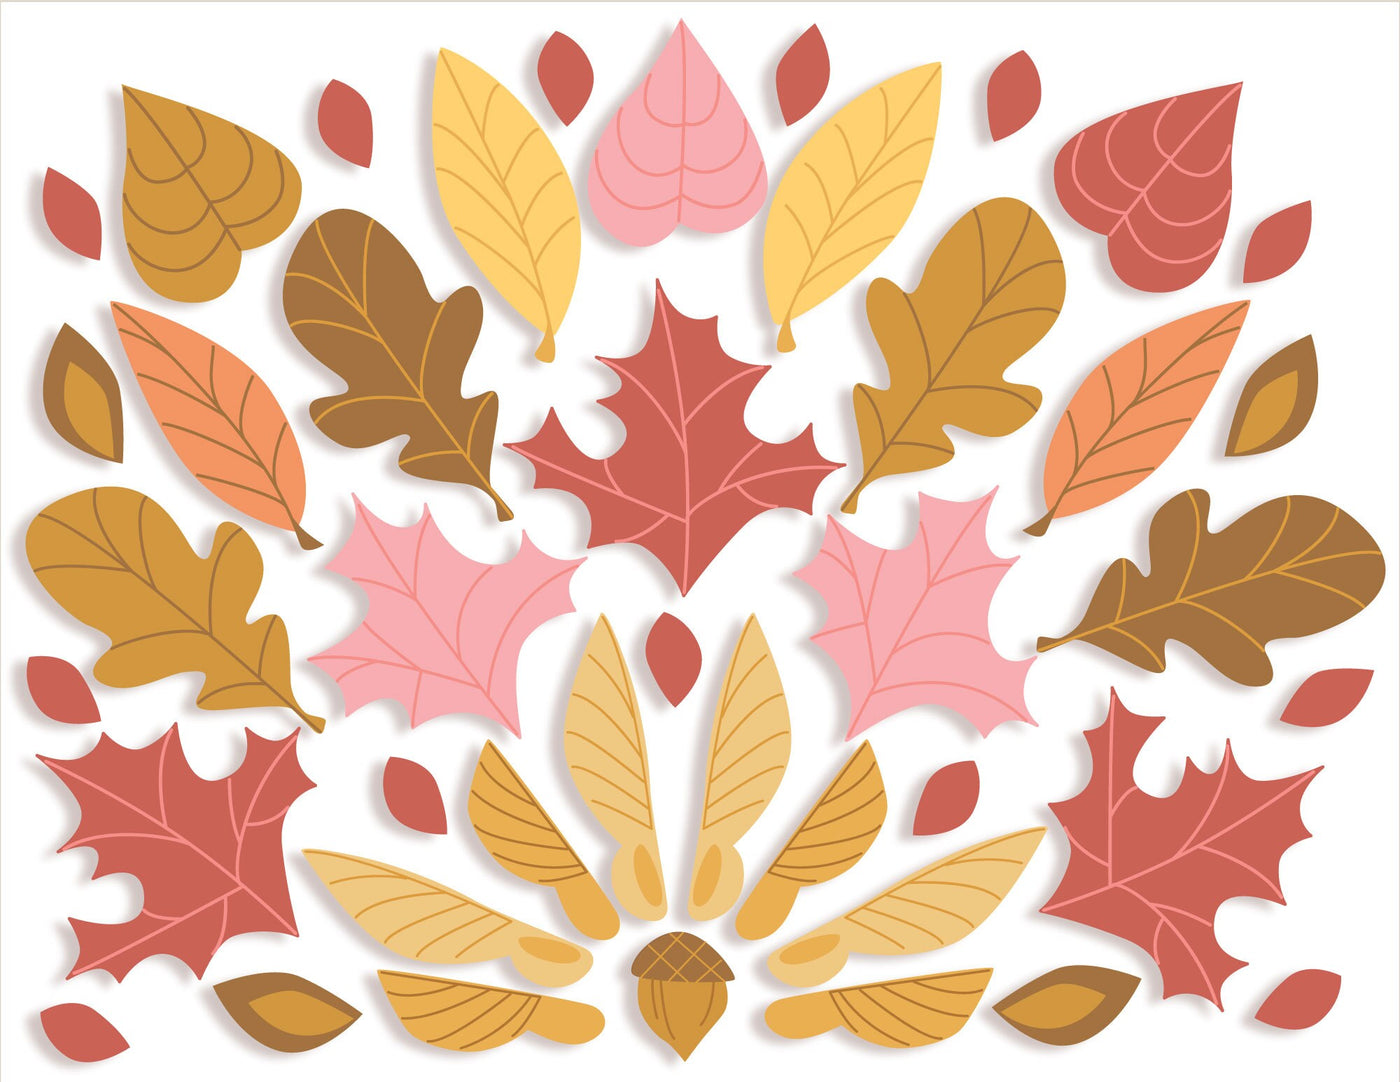 Autumn Fall Leaves decor printable/ SVG craft files for Garlands, Wreaths and more